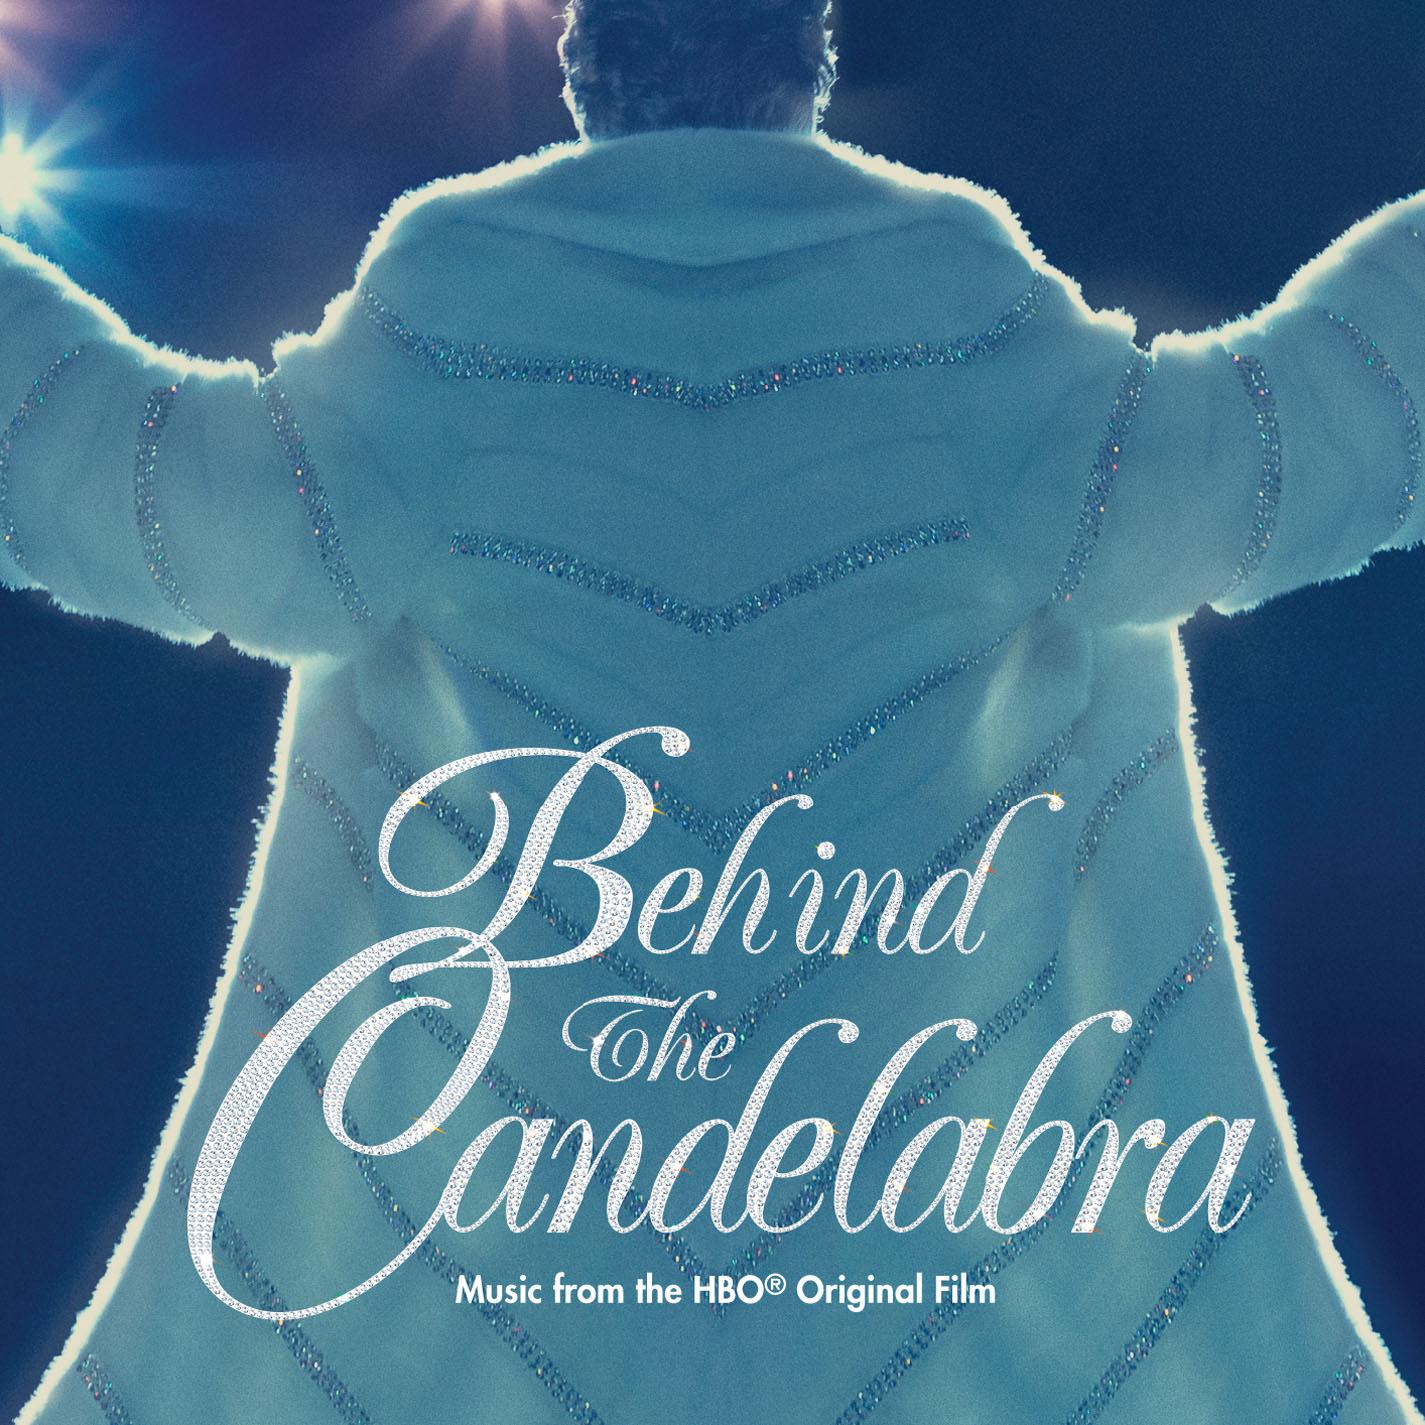 Behind The Candelabra Music from the HBO Original Film